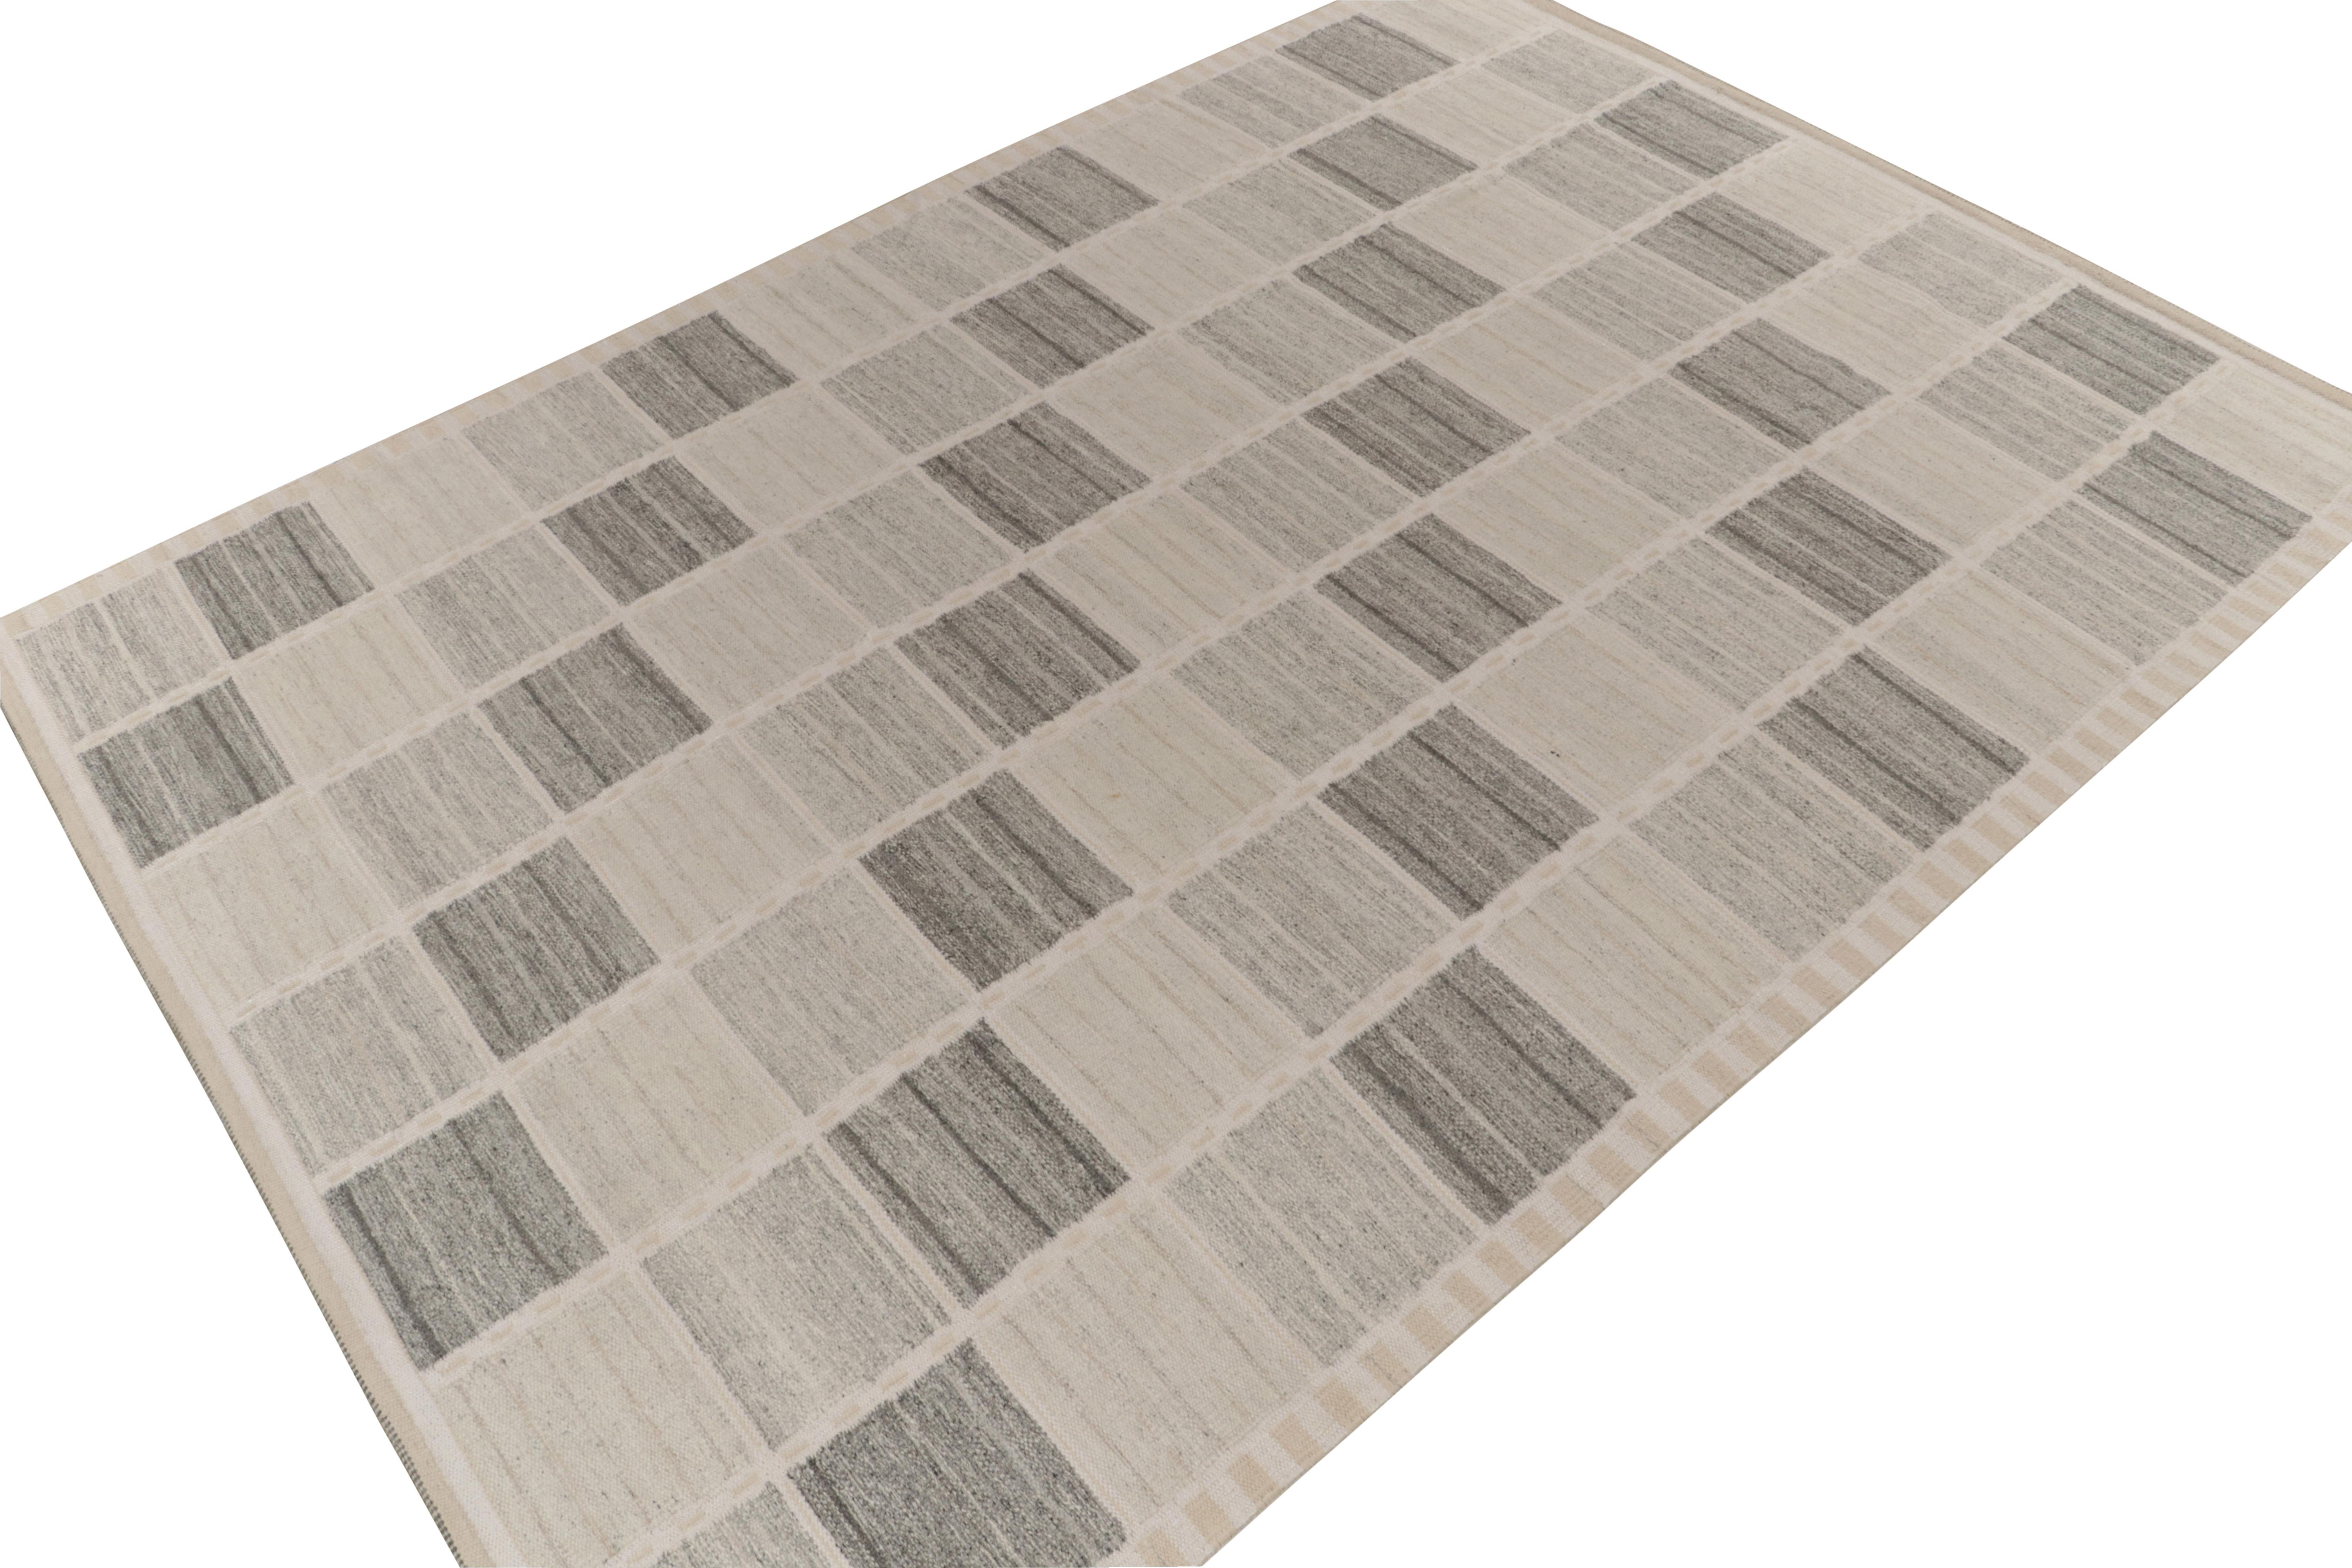 Exemplifying a modern take on Swedish Deco styles, a 9x12 flat weave from Rug & Kilim’s award-winning Scandinavian Kilim collection. 

On the Design: 

The handwoven wool rug enjoys compartmentalisation in gray and white tones—alternating diagonally